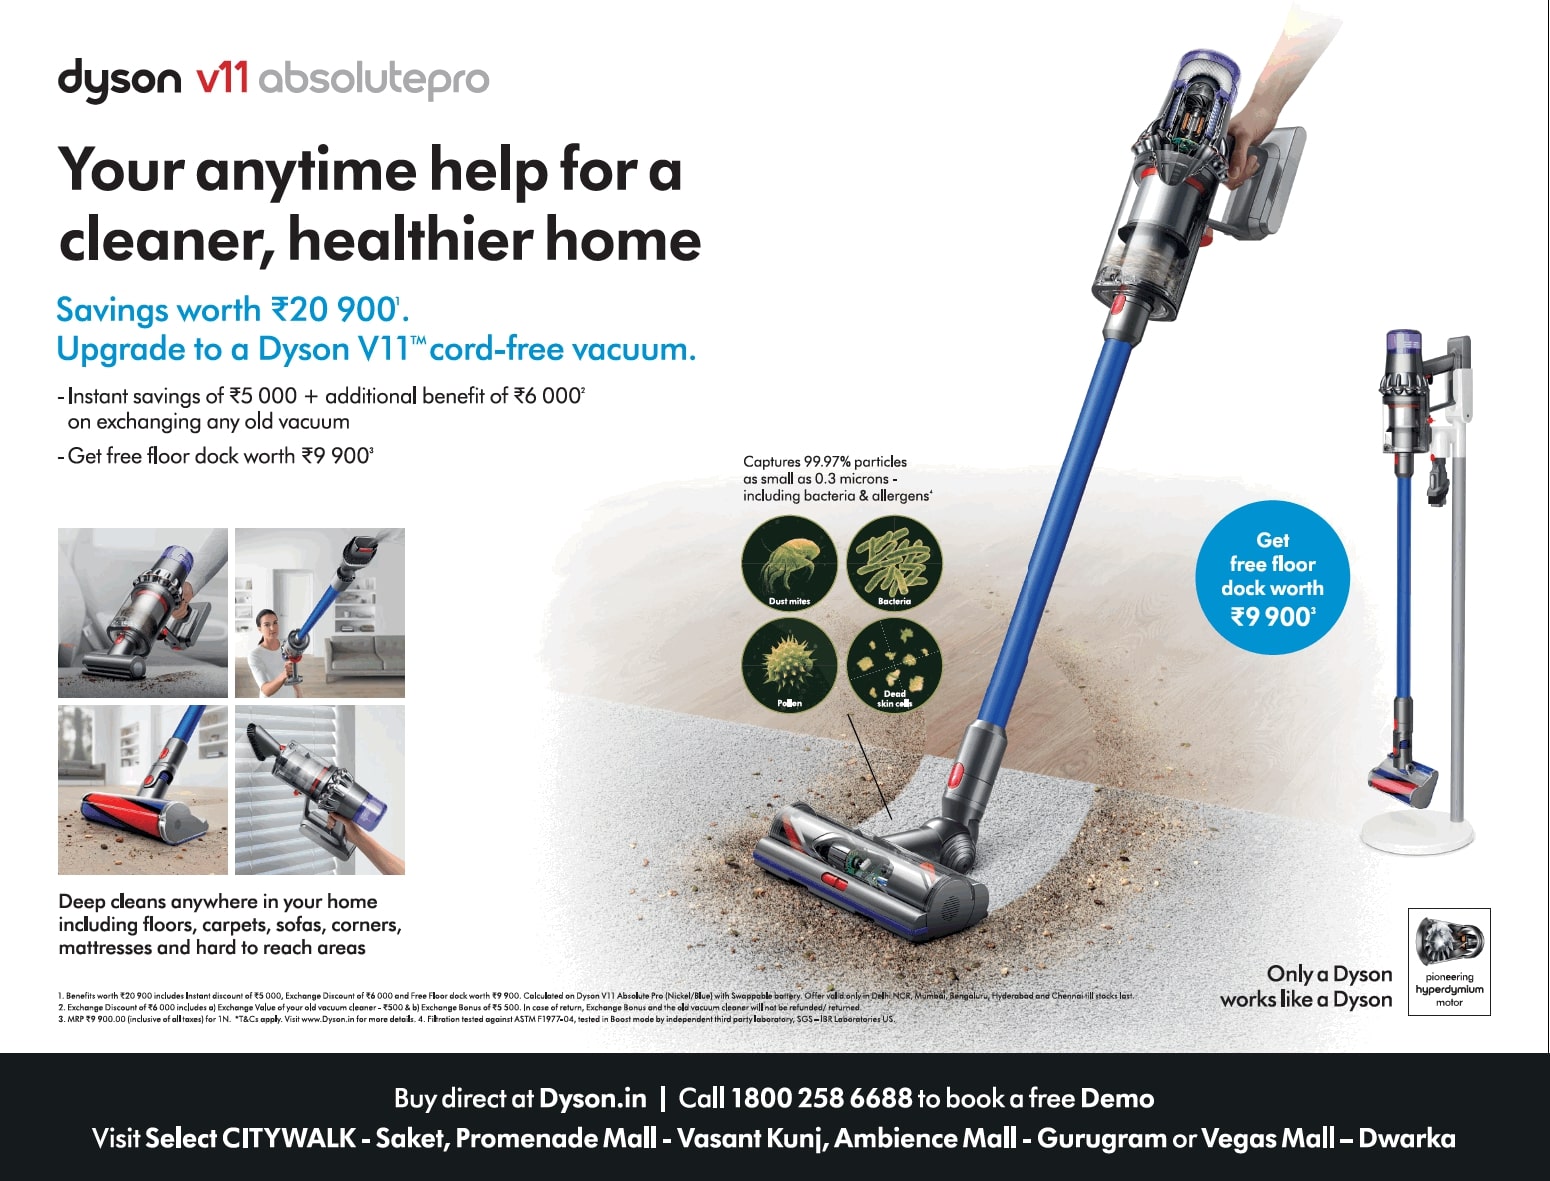 dyson-v11absolitepro-your-anytime-help-for-a-cleaner-healthier-home-ad-times-of-india-delhi-11-04-2021